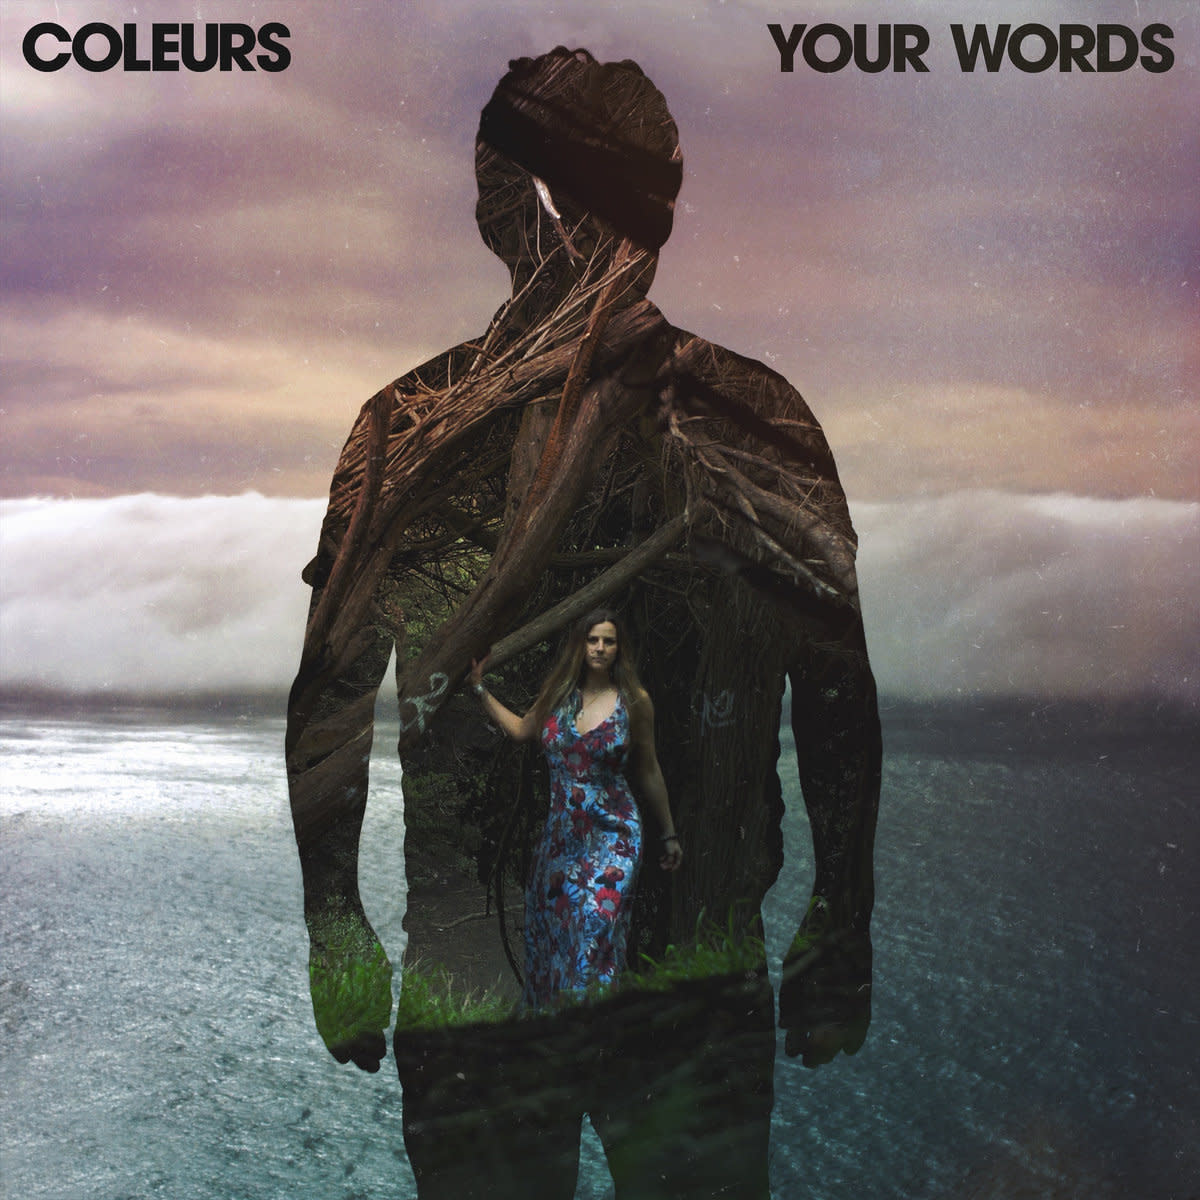 Synth Single Review: “Your Words” by Coleurs & Missing Words